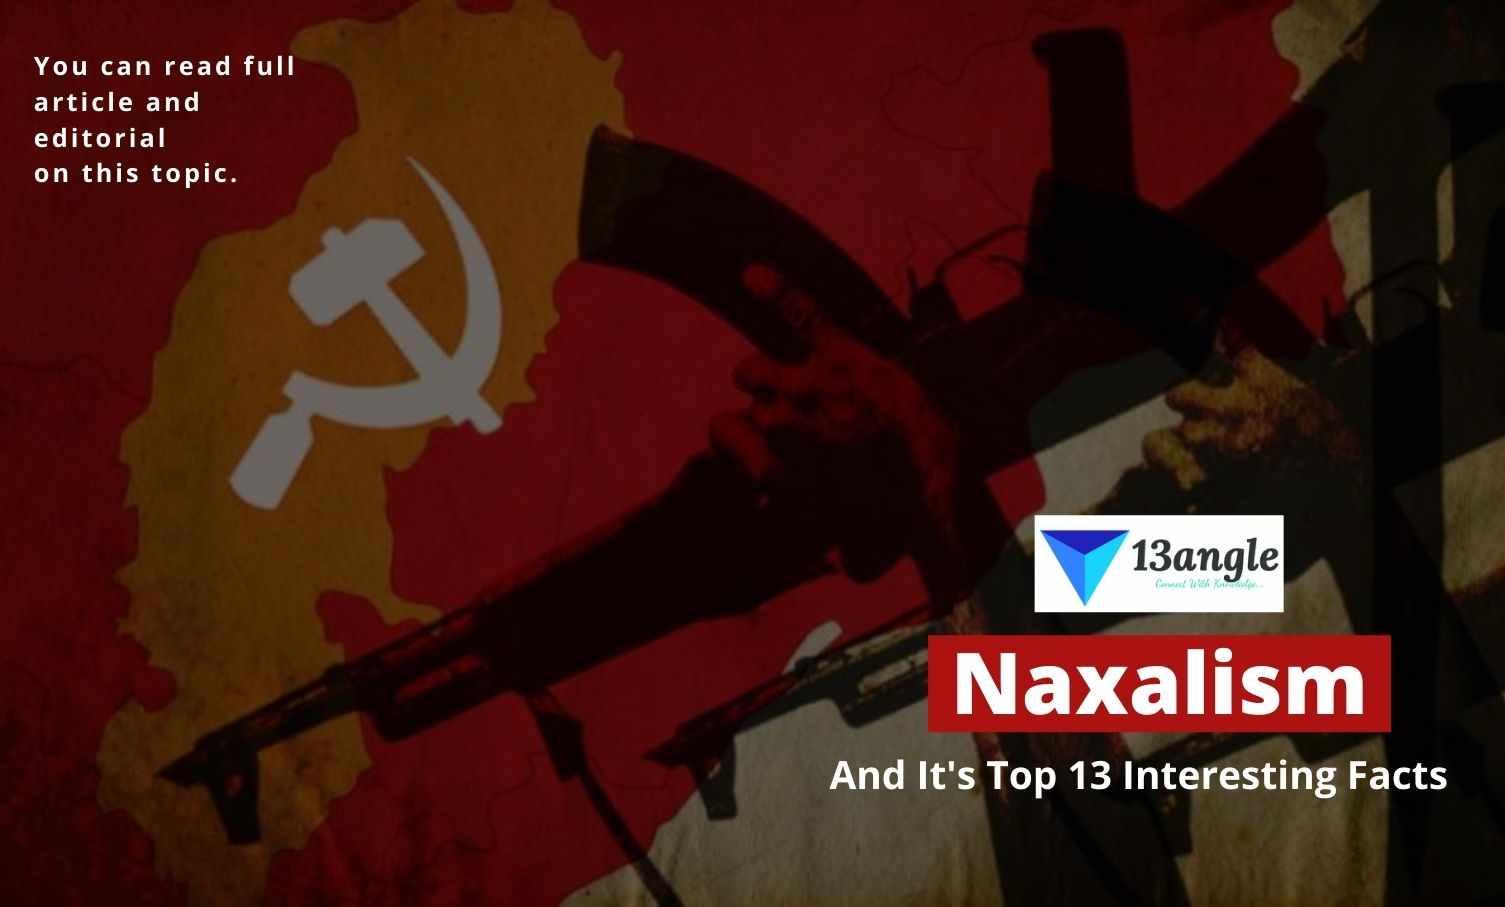 Naxalism And It's Top 13 Interesting Facts- 13angle.com